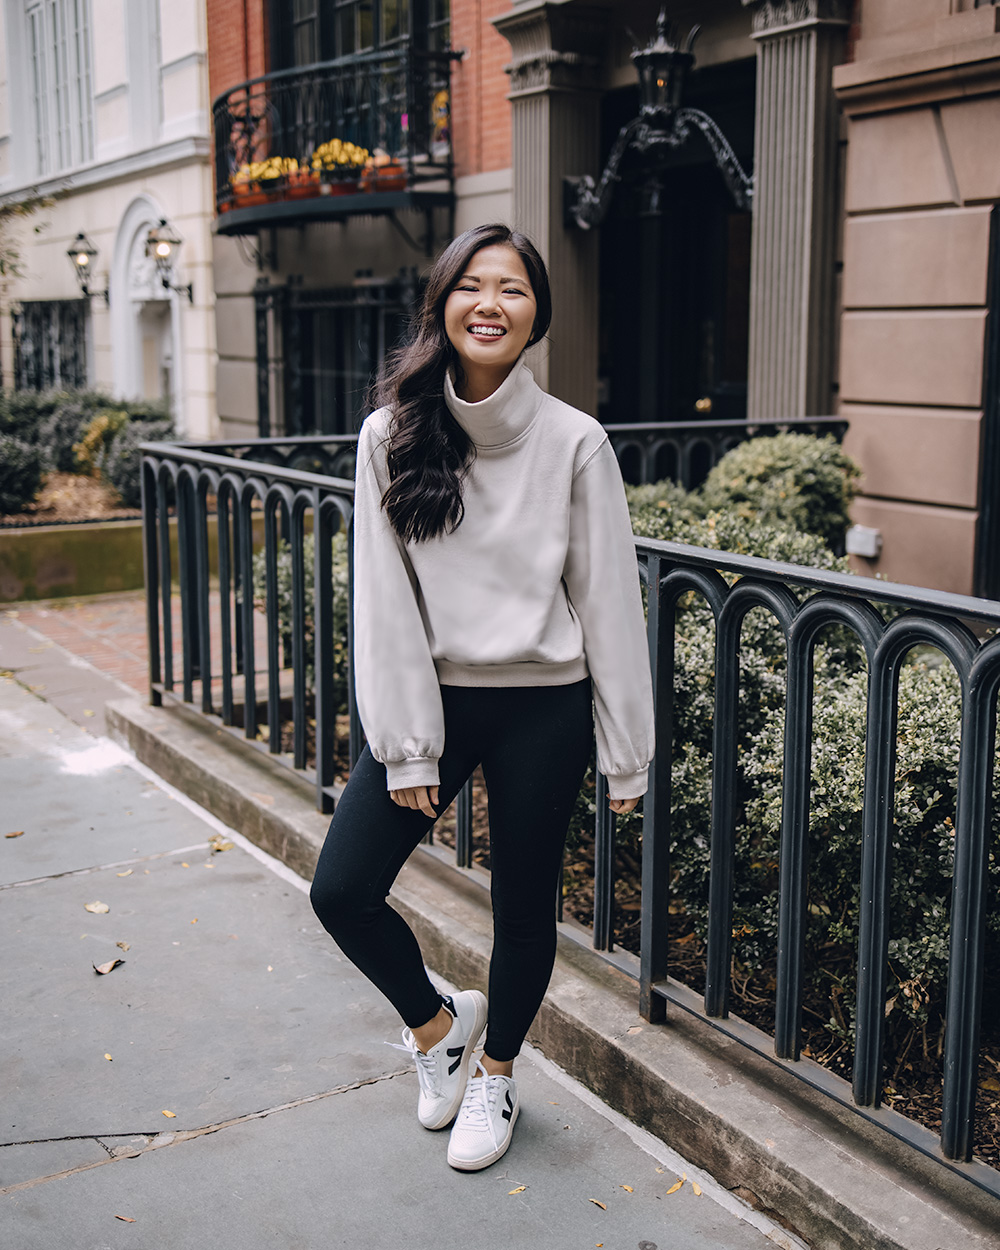 Grey Turtleneck with Black Tights Outfits (11 ideas & outfits